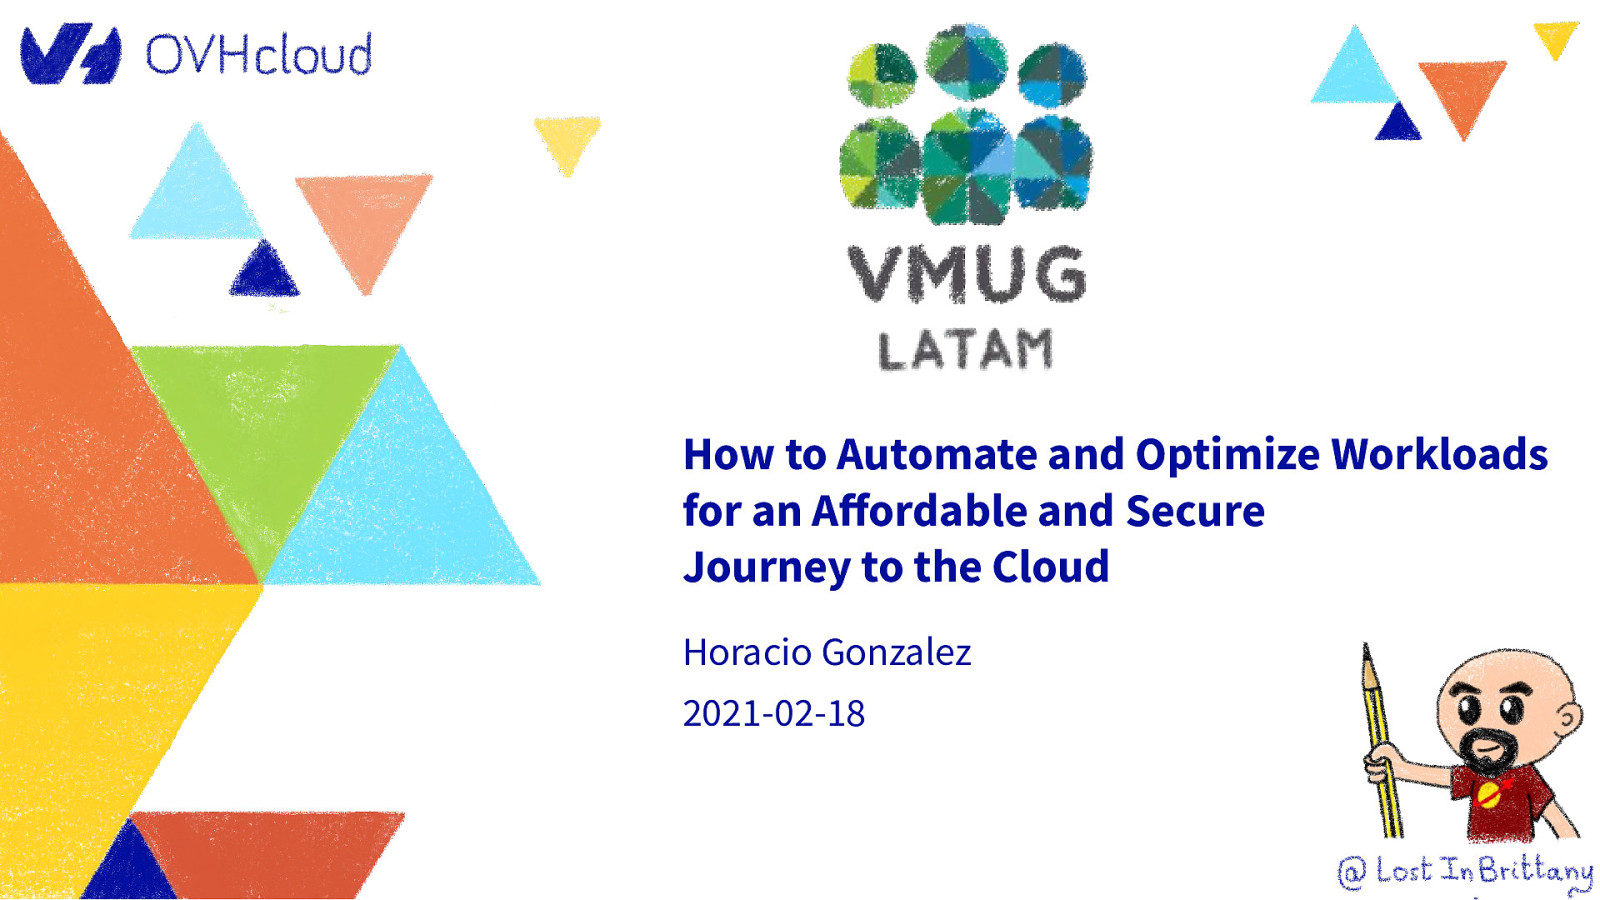 How to Automate and Optimize Workloads for an Affordable and Secure Journey to the Cloud